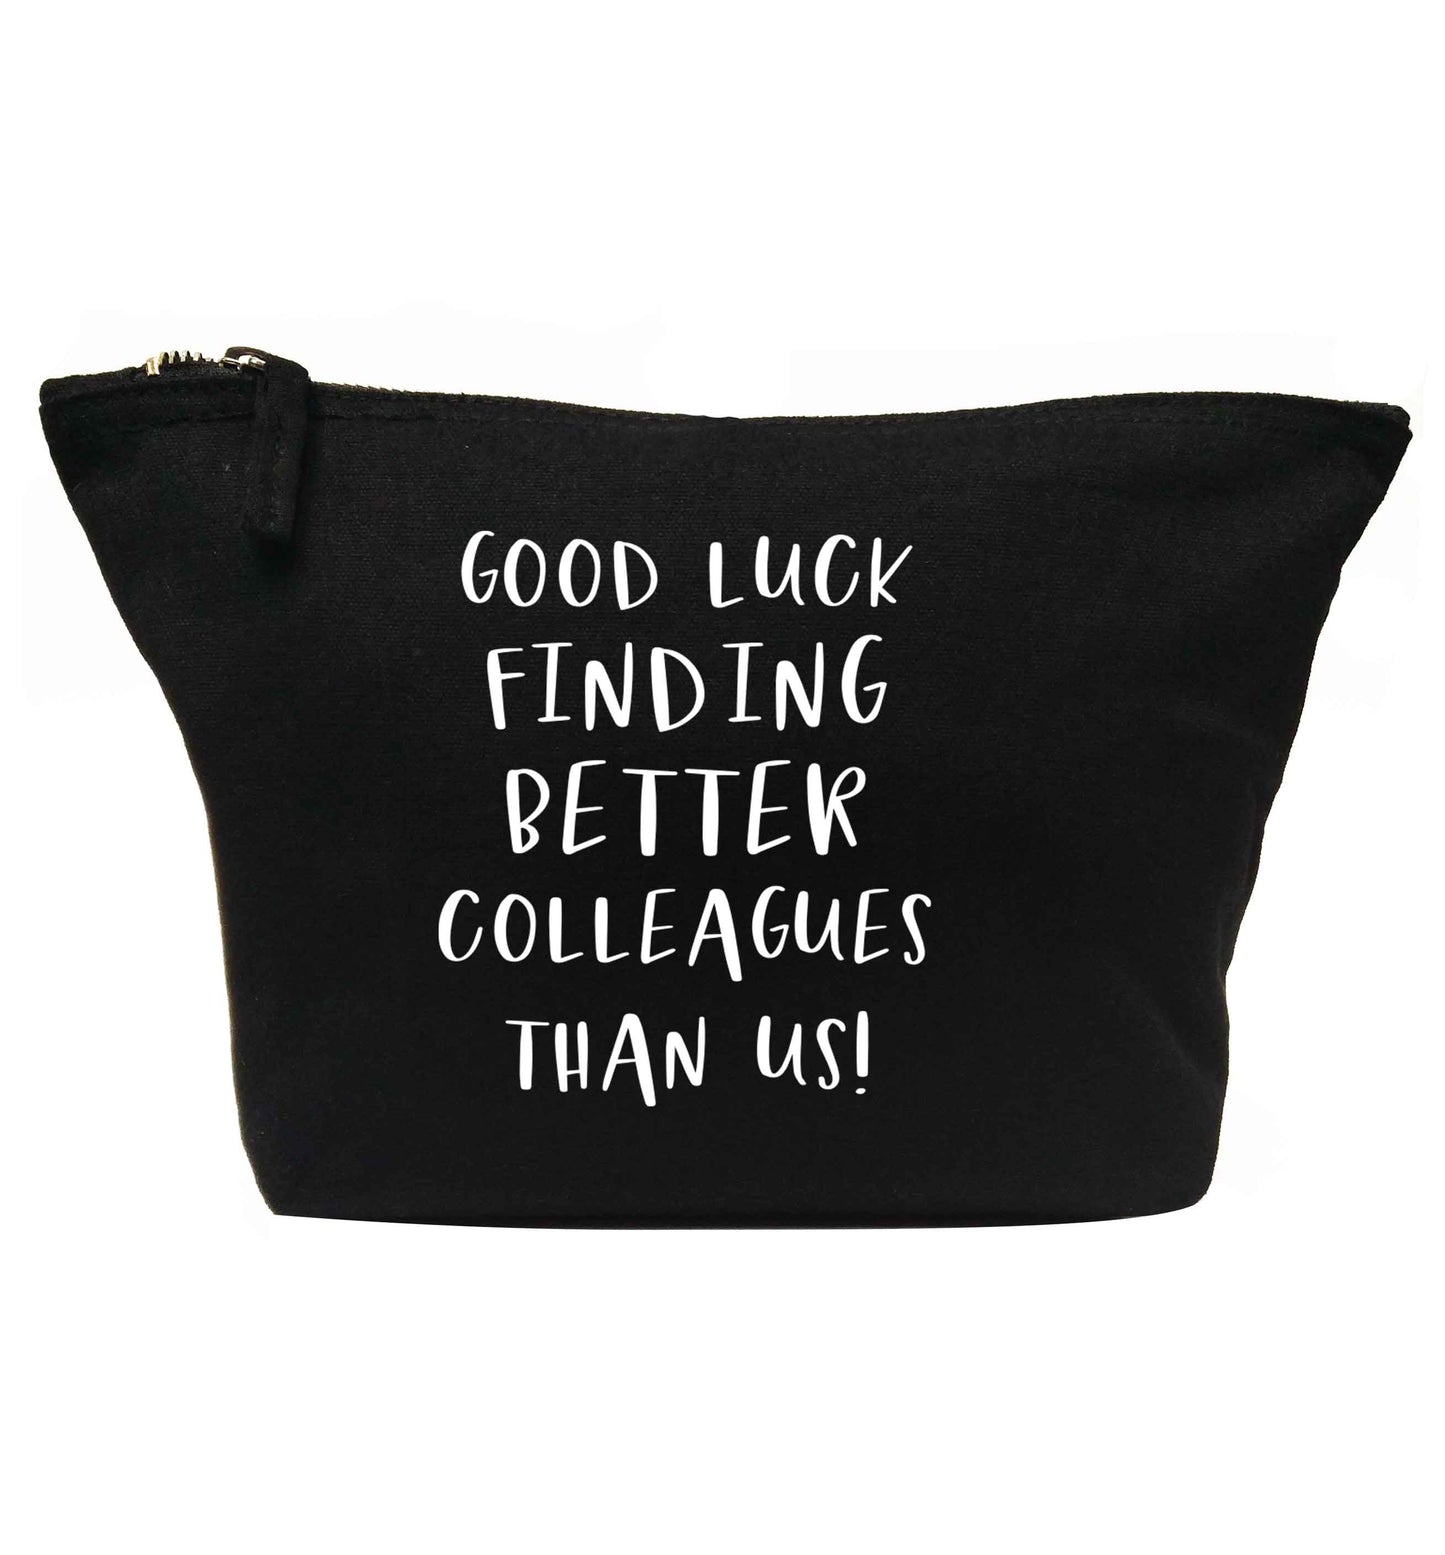 Good luck finding better colleagues than us! | makeup / wash bag